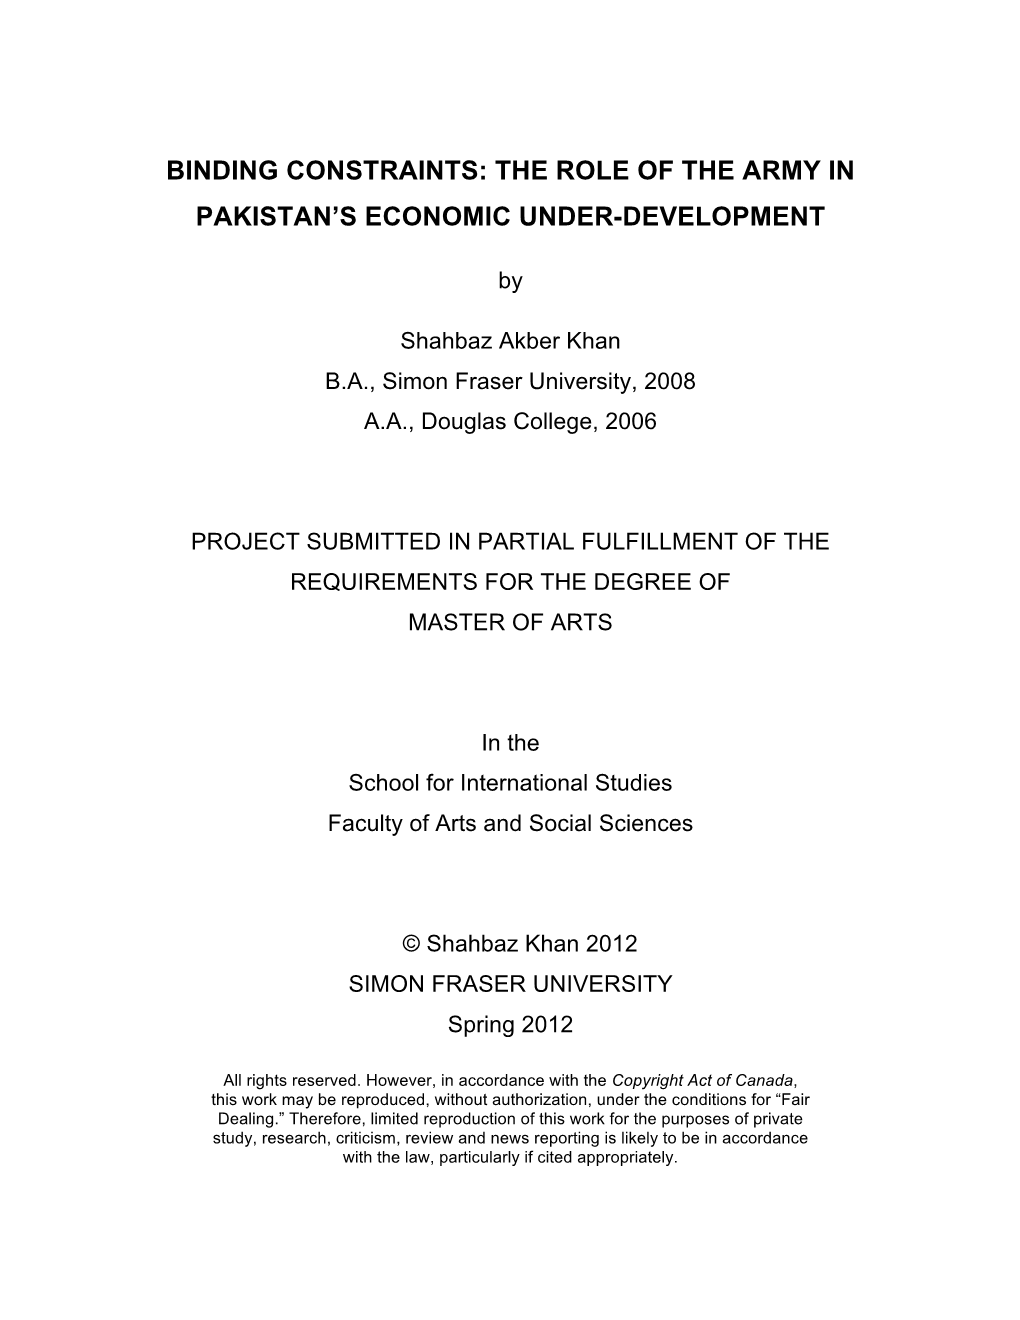 Binding Constraints: the Role of the Army in Pakistan’S Economic Under-Development